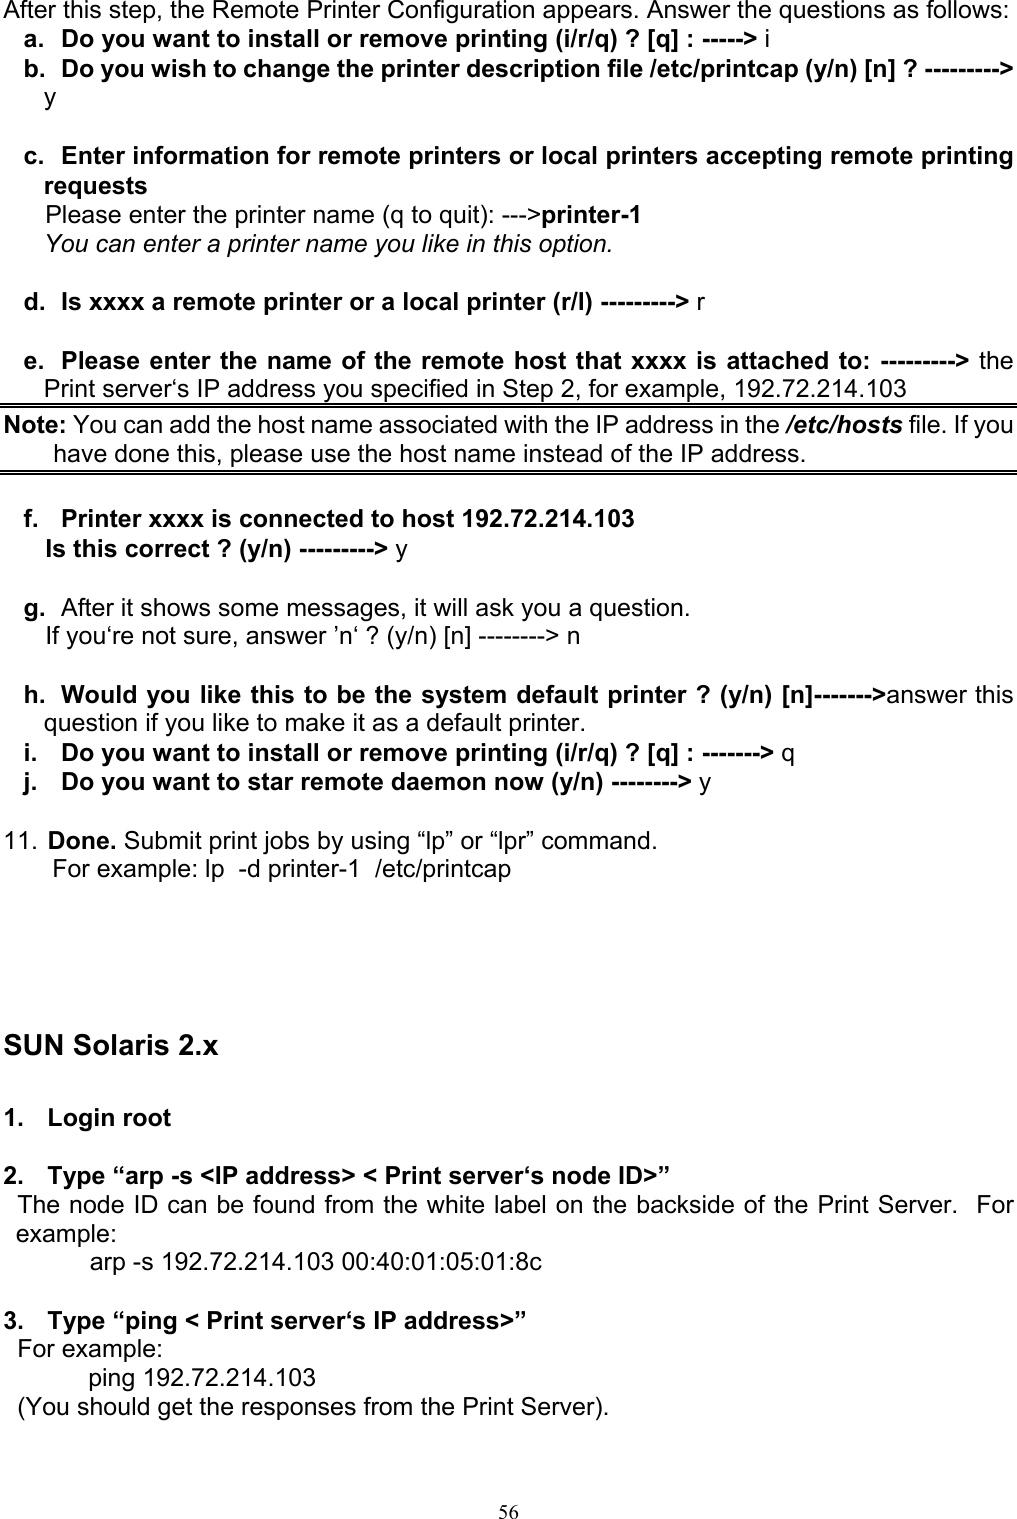   56After this step, the Remote Printer Configuration appears. Answer the questions as follows: a.  Do you want to install or remove printing (i/r/q) ? [q] : -----&gt; i b.  Do you wish to change the printer description file /etc/printcap (y/n) [n] ? ---------&gt; y  c.  Enter information for remote printers or local printers accepting remote printing requests       Please enter the printer name (q to quit): ---&gt;printer-1 You can enter a printer name you like in this option.  d.  Is xxxx a remote printer or a local printer (r/l) ---------&gt; r  e.  Please enter the name of the remote host that xxxx is attached to: ---------&gt; the Print server‘s IP address you specified in Step 2, for example, 192.72.214.103 Note: You can add the host name associated with the IP address in the /etc/hosts file. If you have done this, please use the host name instead of the IP address.  f.  Printer xxxx is connected to host 192.72.214.103       Is this correct ? (y/n) ---------&gt; y  g.  After it shows some messages, it will ask you a question.       If you‘re not sure, answer ’n‘ ? (y/n) [n] --------&gt; n  h.  Would you like this to be the system default printer ? (y/n) [n]-------&gt;answer this question if you like to make it as a default printer. i.  Do you want to install or remove printing (i/r/q) ? [q] : -------&gt; q j.  Do you want to star remote daemon now (y/n) --------&gt; y  11. Done. Submit print jobs by using “lp” or “lpr” command.        For example: lp  -d printer-1  /etc/printcap      SUN Solaris 2.x  1. Login root  2.  Type “arp -s &lt;IP address&gt; &lt; Print server‘s node ID&gt;”   The node ID can be found from the white label on the backside of the Print Server.  For example:        arp -s 192.72.214.103 00:40:01:05:01:8c  3.  Type “ping &lt; Print server‘s IP address&gt;”   For example:      ping 192.72.214.103   (You should get the responses from the Print Server). 